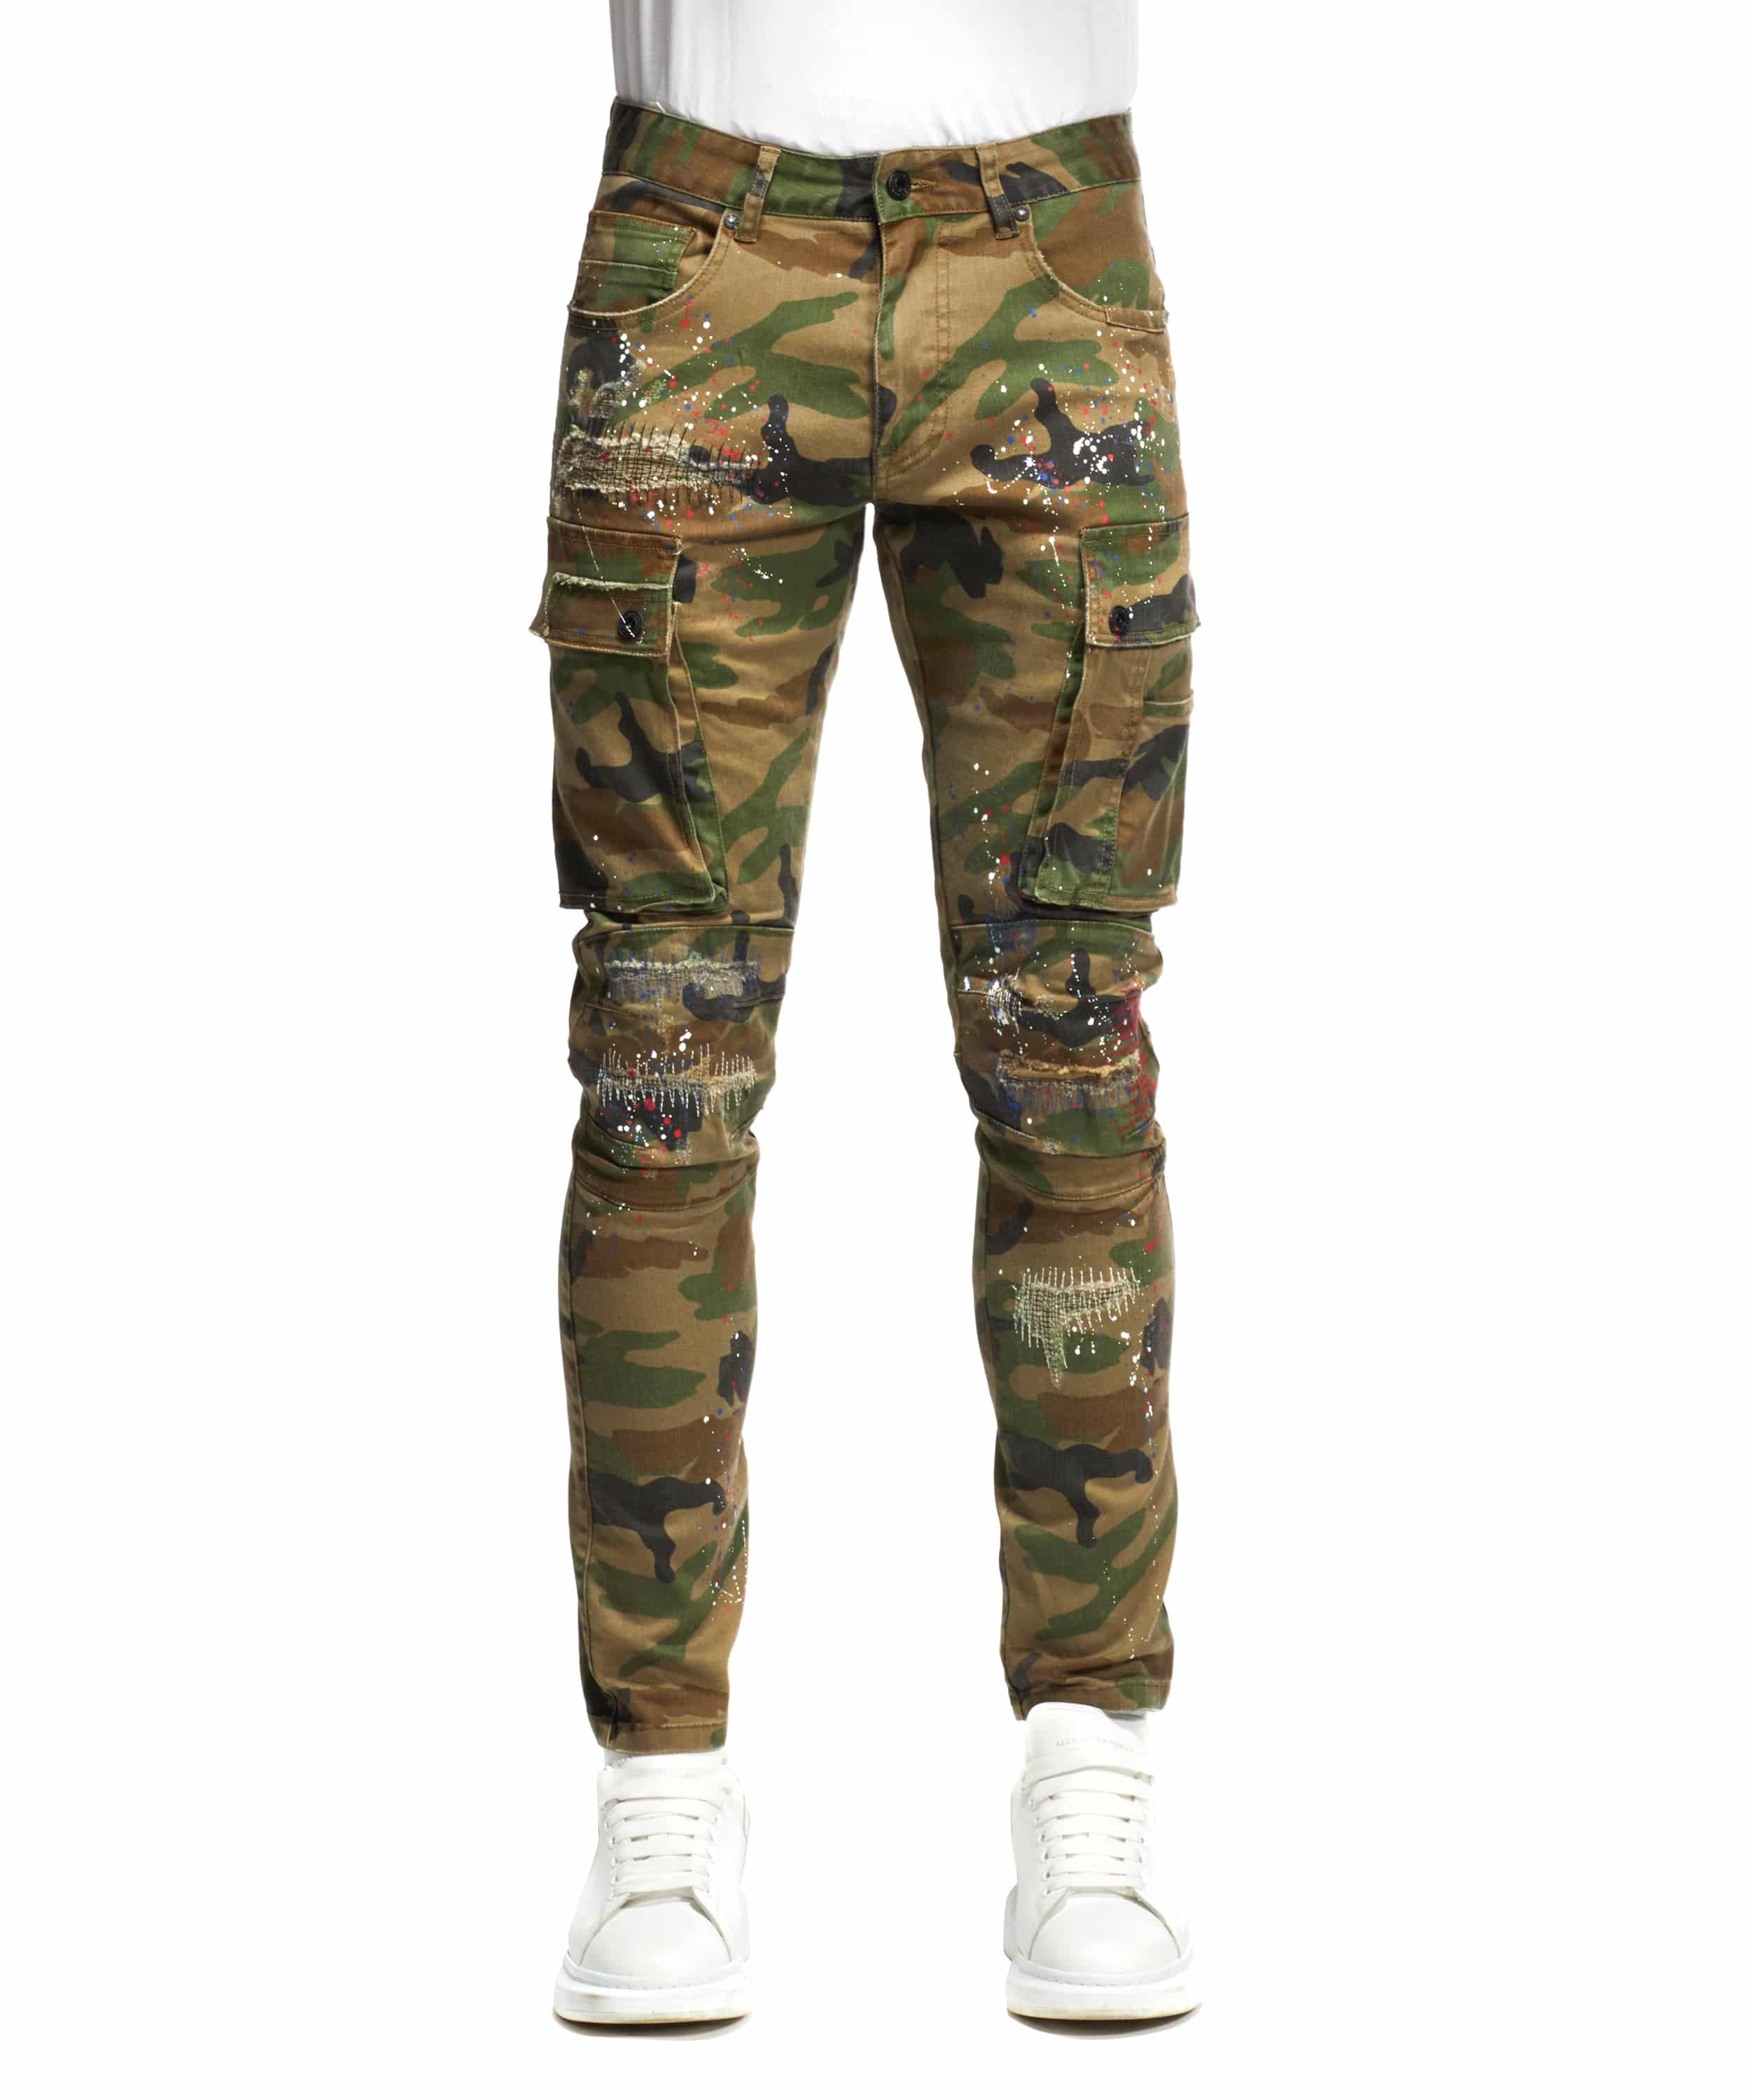 TheyLook Men's Slim Fit Camo Pants 6 Pockets Stretch Skinny Casual Cargo  Pants Popular Fashion at Amazon Men's Clothing store